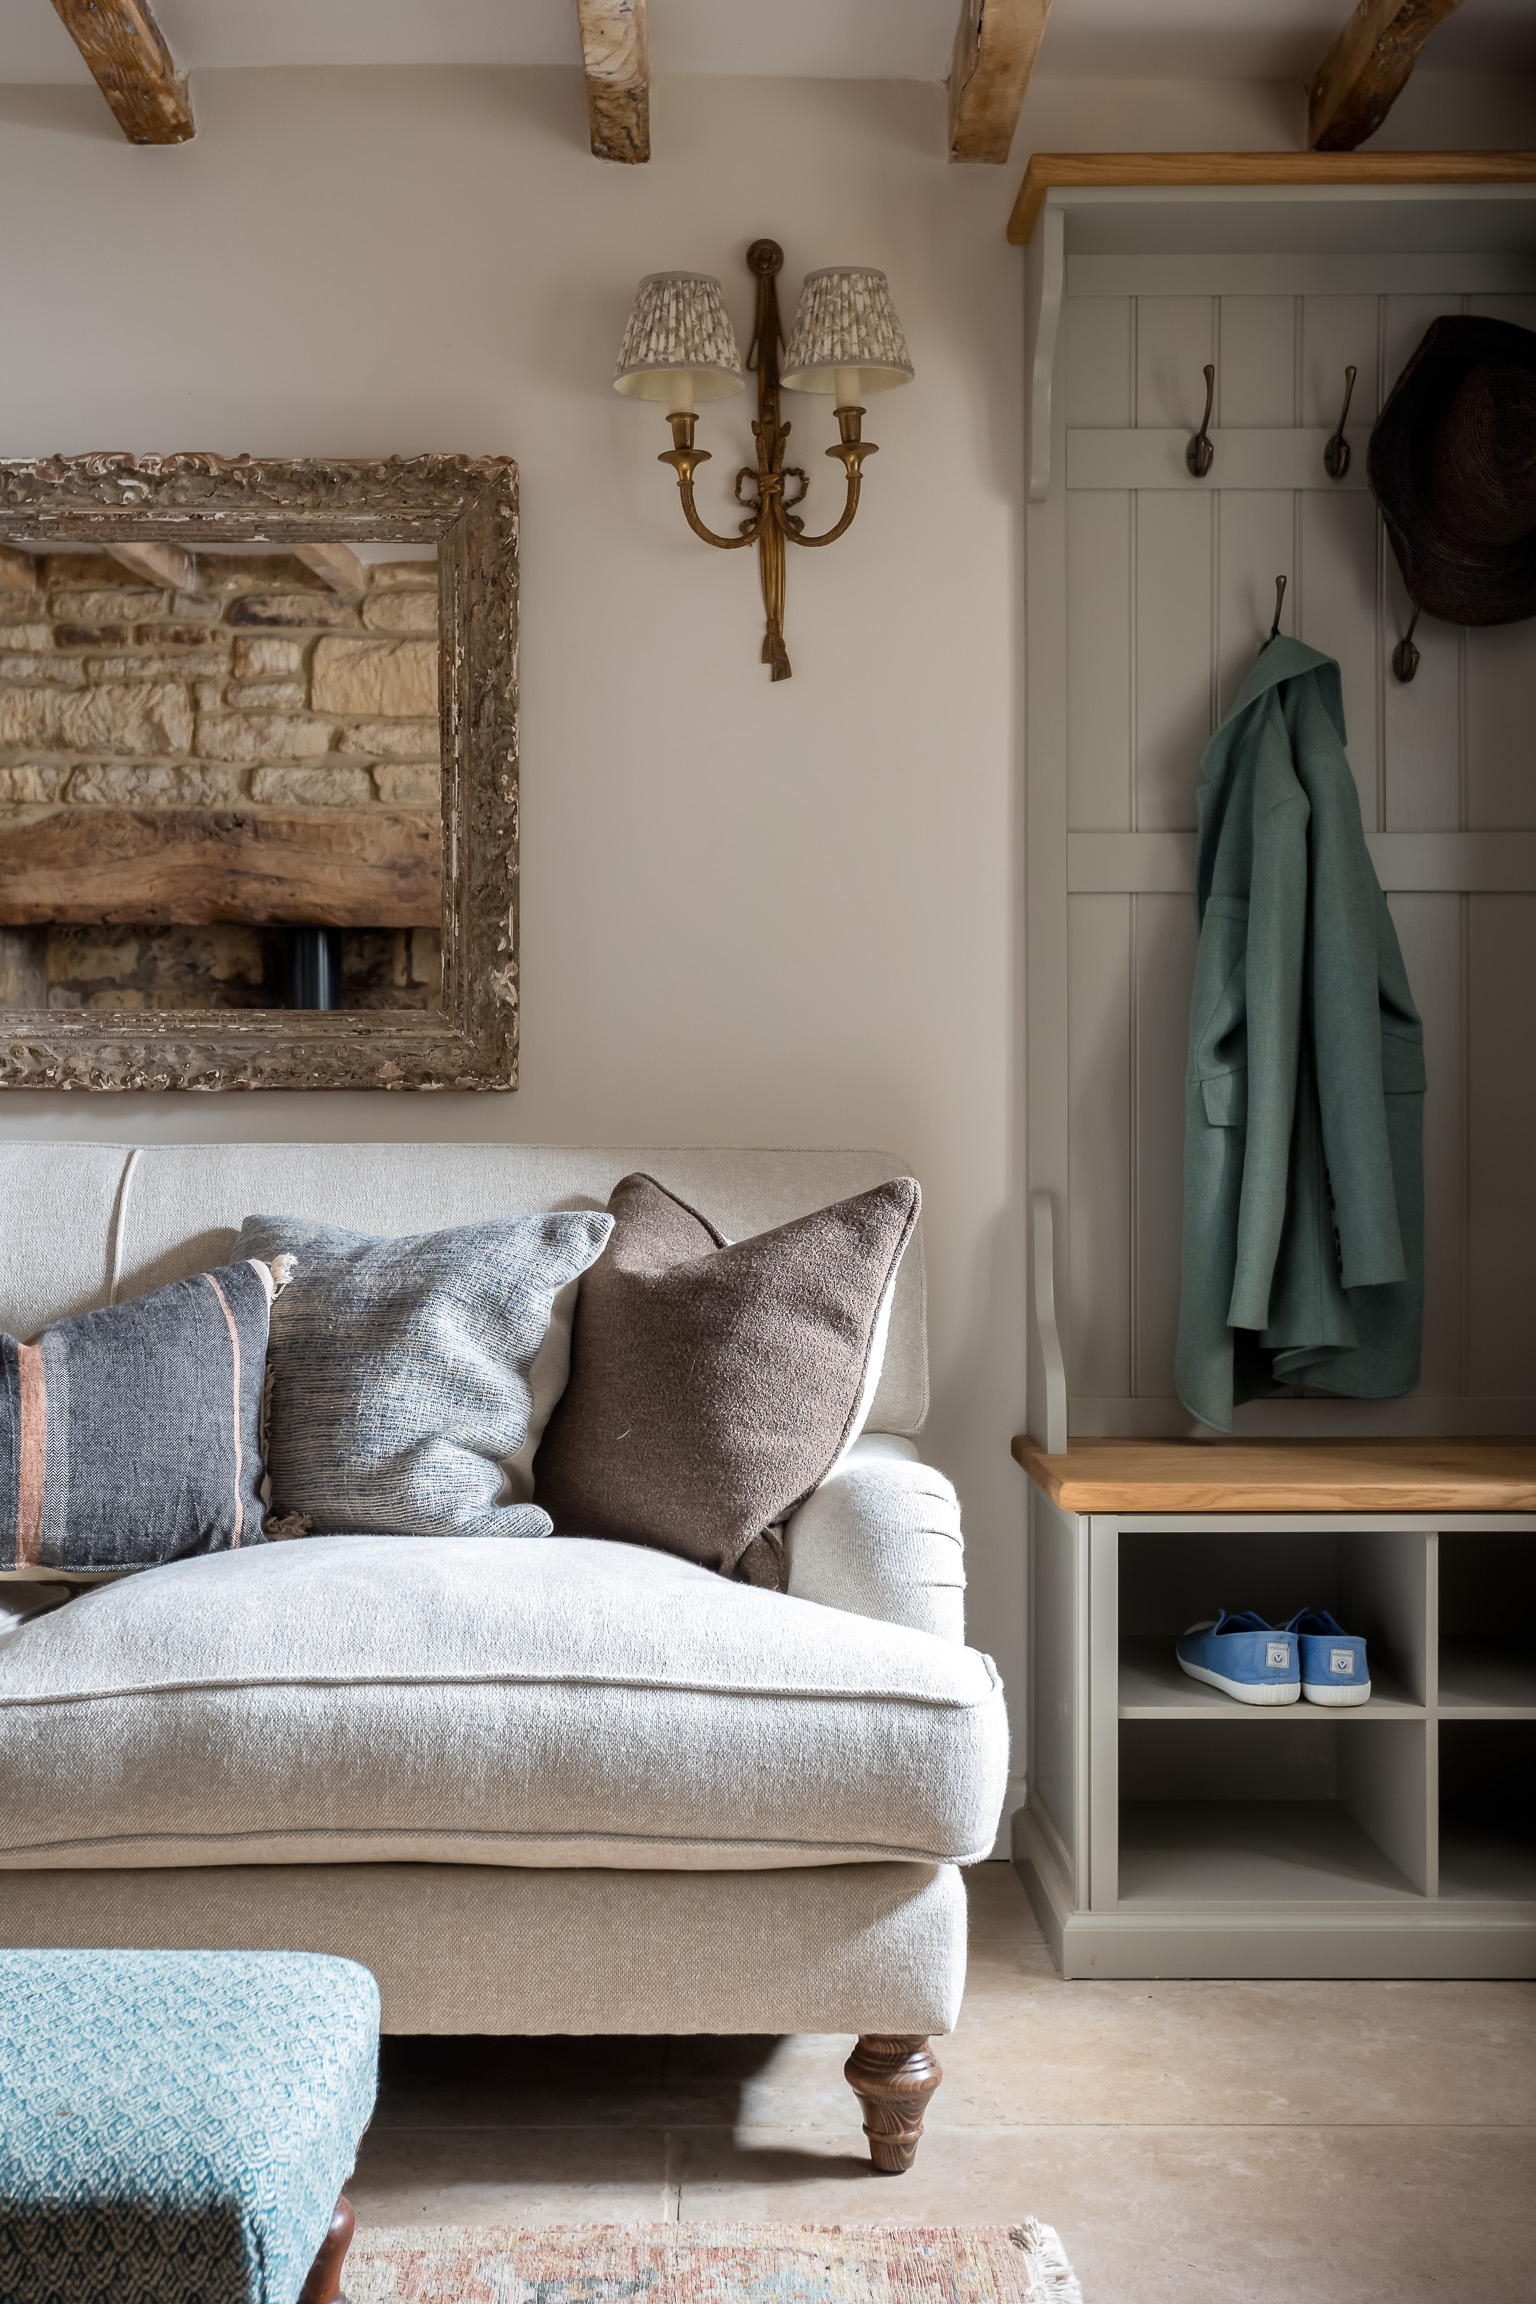 Cosy sofa, antique mirror and wall lights. Built in coat rack